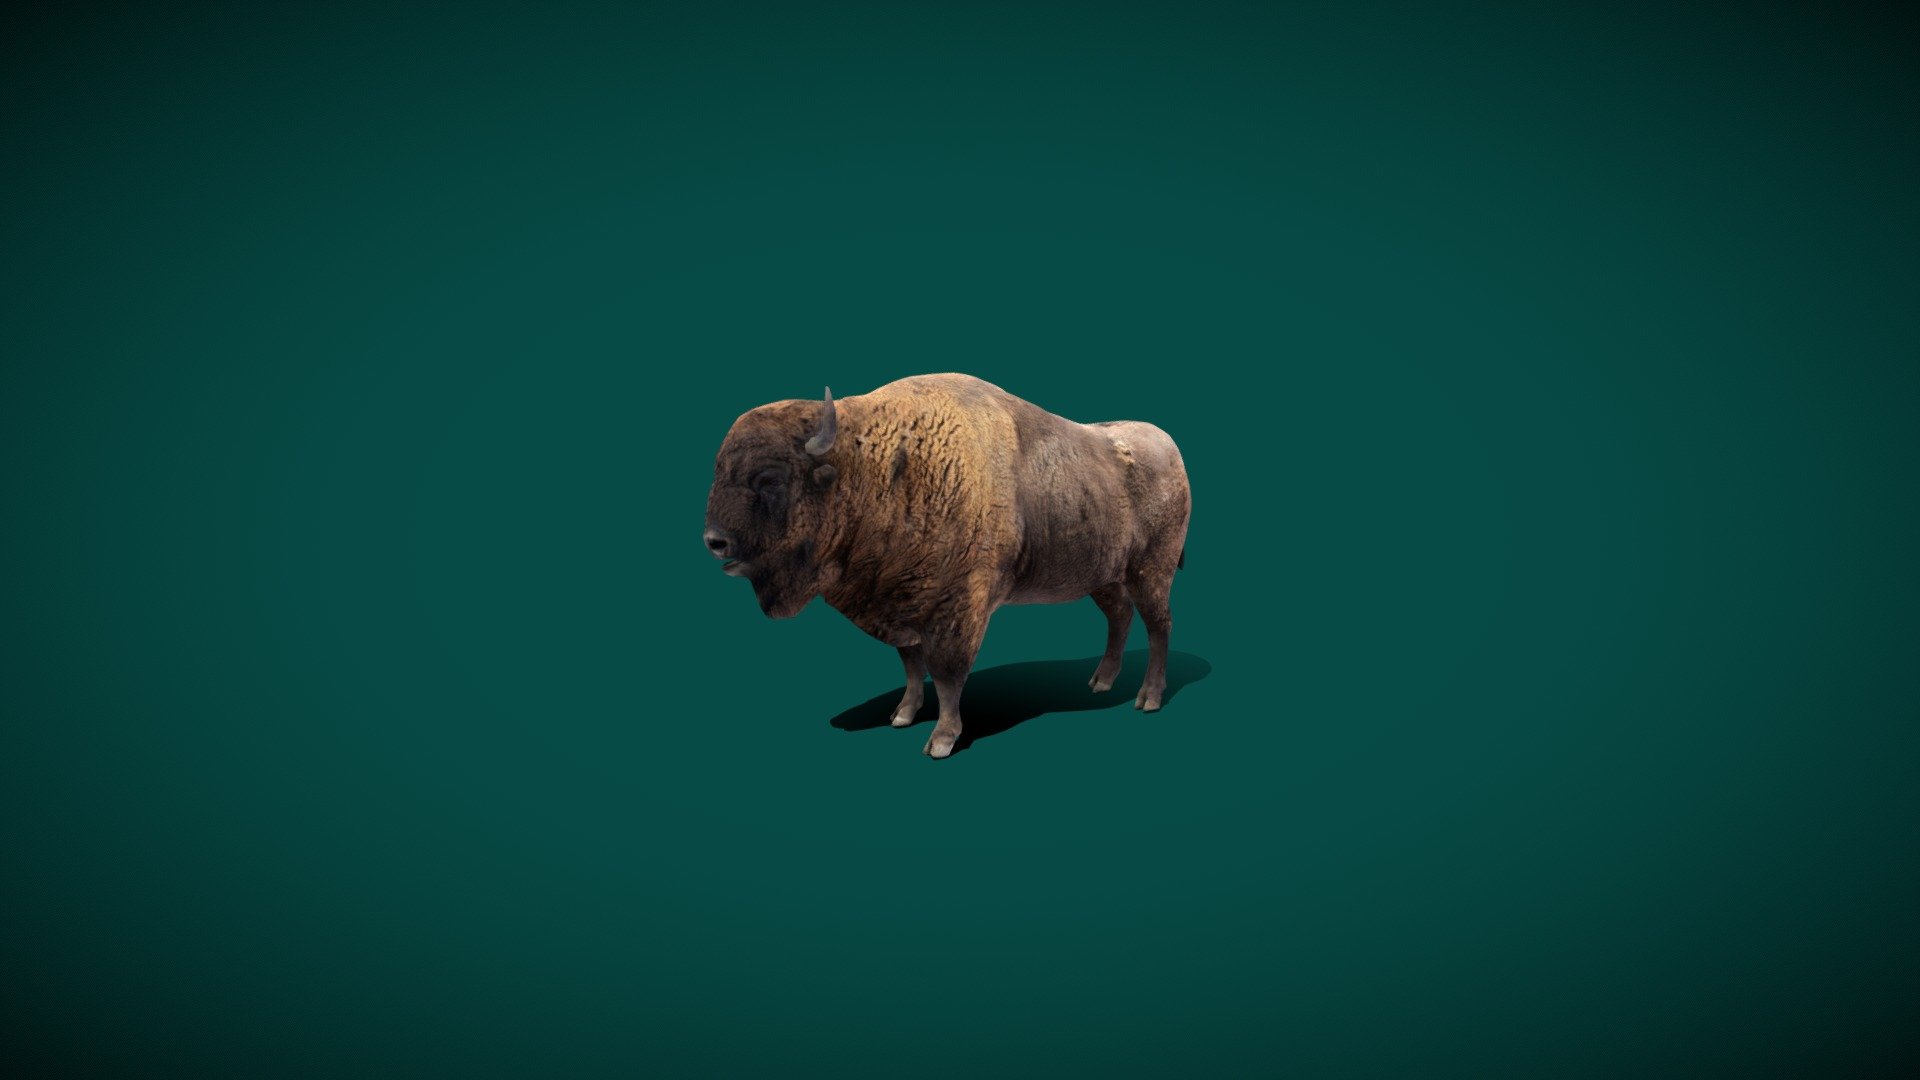 European_Bison (Wood Bison ) Wisent
*Bison bonasus Animal Mammal (  zubr)  European Buffalo 

1 Draw Calls

Lowpoly

Game Ready Asset

Subdivision Surface Ready

Single Animations

4K PBR Textures  Materials 

Unreal FBX (Unreal 4,5 Plus)

Unity FBX  

Blend File 3.6.5 LTS

USDZ File (AR Ready). Real Scale Dimension (Xcode ,Reality Composer Ready)

Textures Files

GLB File (Unreal 5.1  Plus Native Support)


Gltf File ( Spark AR, Lens Studio(SnapChat) , Effector(Tiktok) , Spline, Play Canvas,Omiverse ) Compatible




Triangles : 9791



Vertices  : 4924

Faces     : 5010

Edges     : 9932

Diffuse, Metallic, Roughness , Normal Map ,Specular Map,AO

The European bison or the European wood bison, also known as the wisent, the zubr, or sometimes colloquially as the European buffalo, is a European species of bison. It is one of two extant species of bison, alongside the American bison 3d model